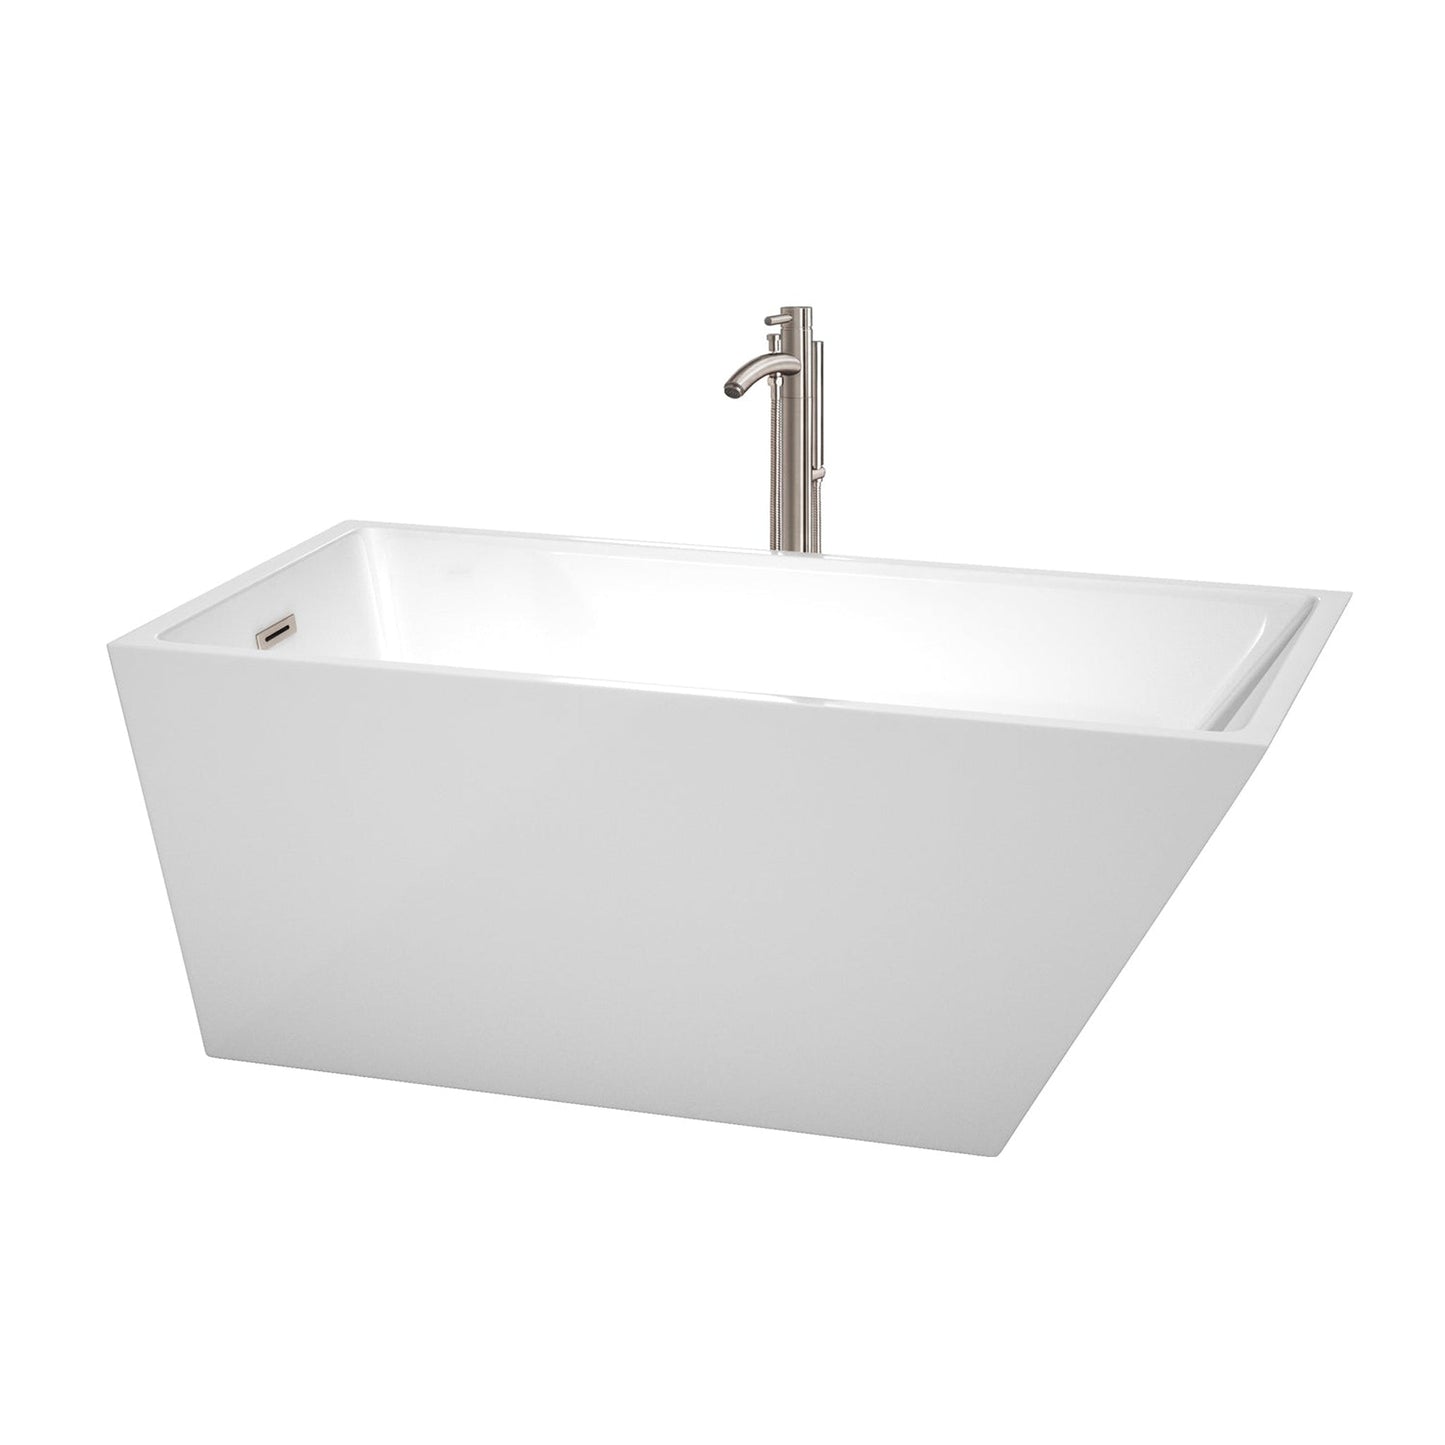 Wyndham Collection Hannah 59" Freestanding Bathtub in White With Floor Mounted Faucet, Drain and Overflow Trim in Brushed Nickel